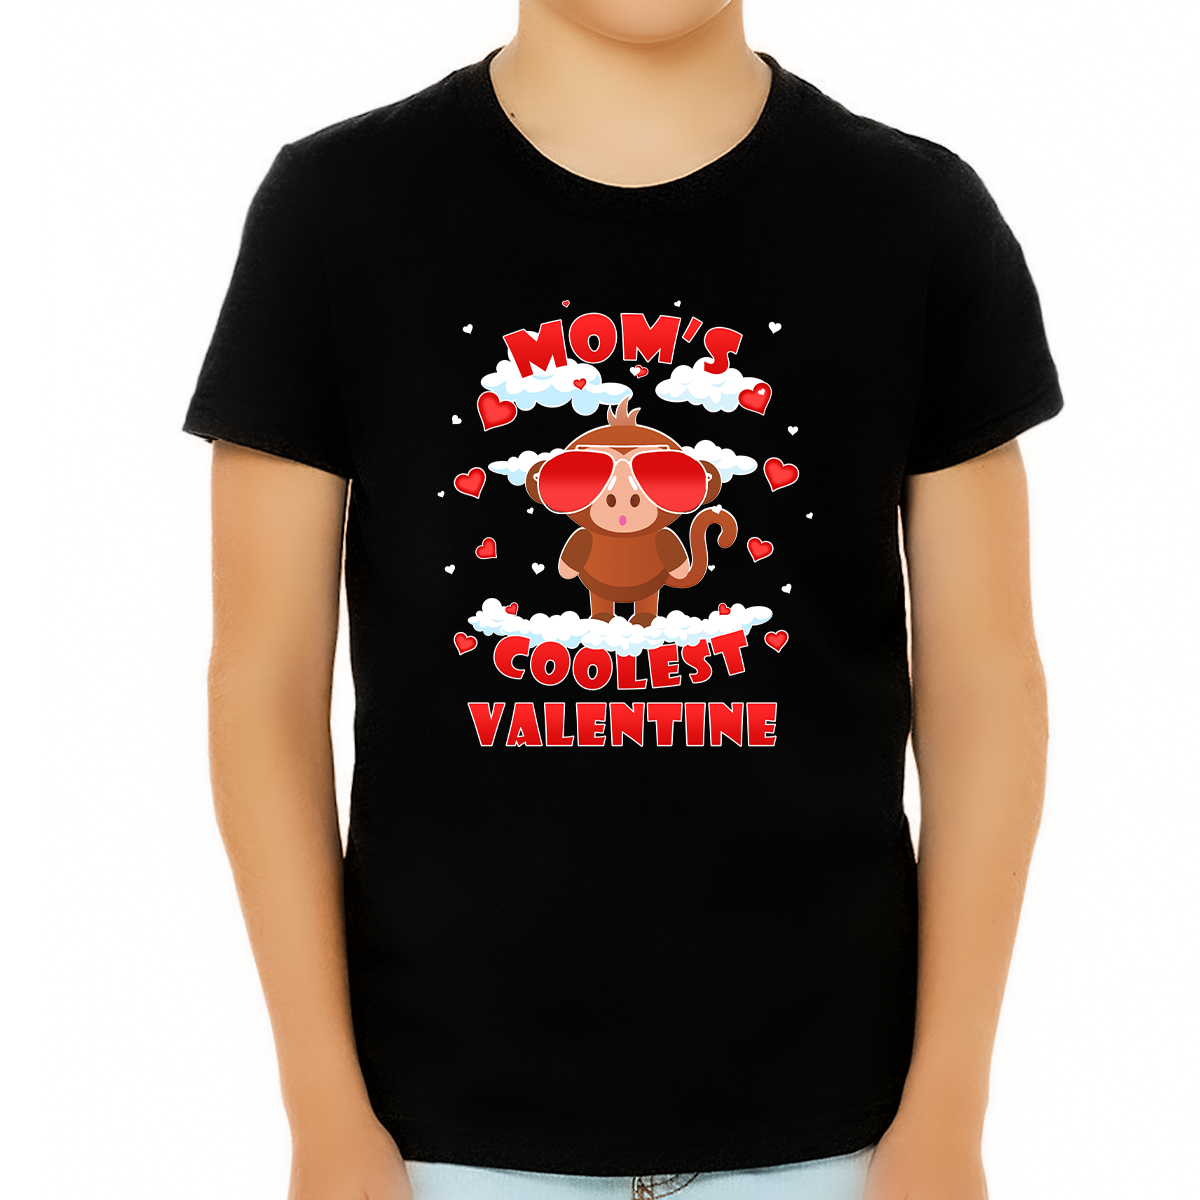 Boys Valentines Day Shirts Valentine's Day Hearts Love Kids Shirt Cool Valentines Day Gifts for Kids